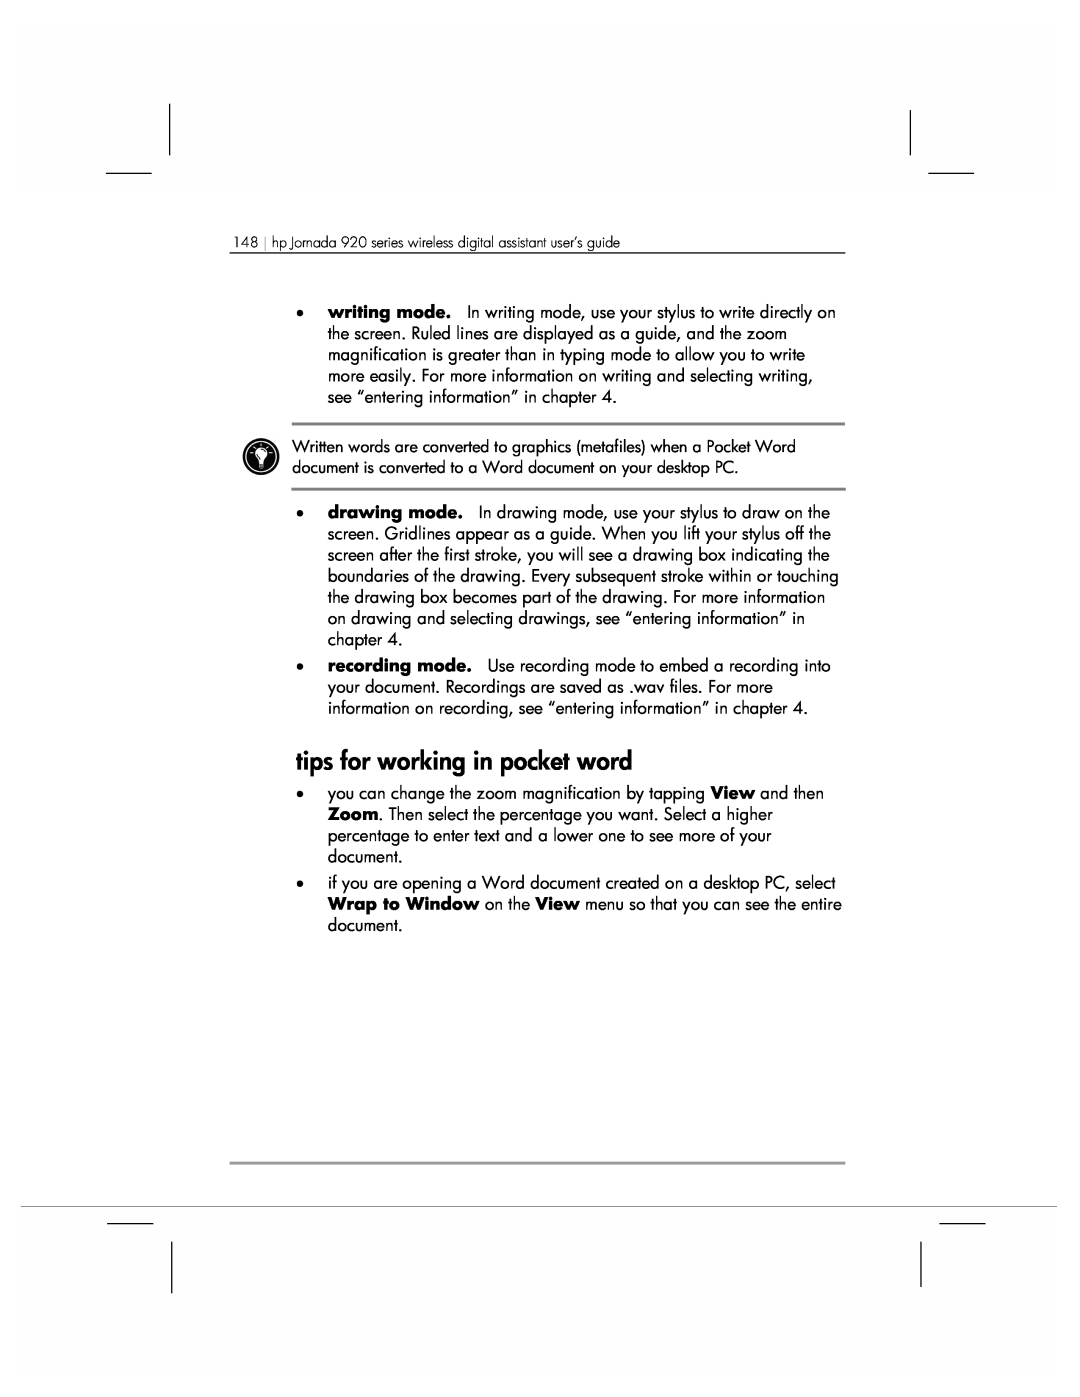 HP 920 manual tips for working in pocket word 